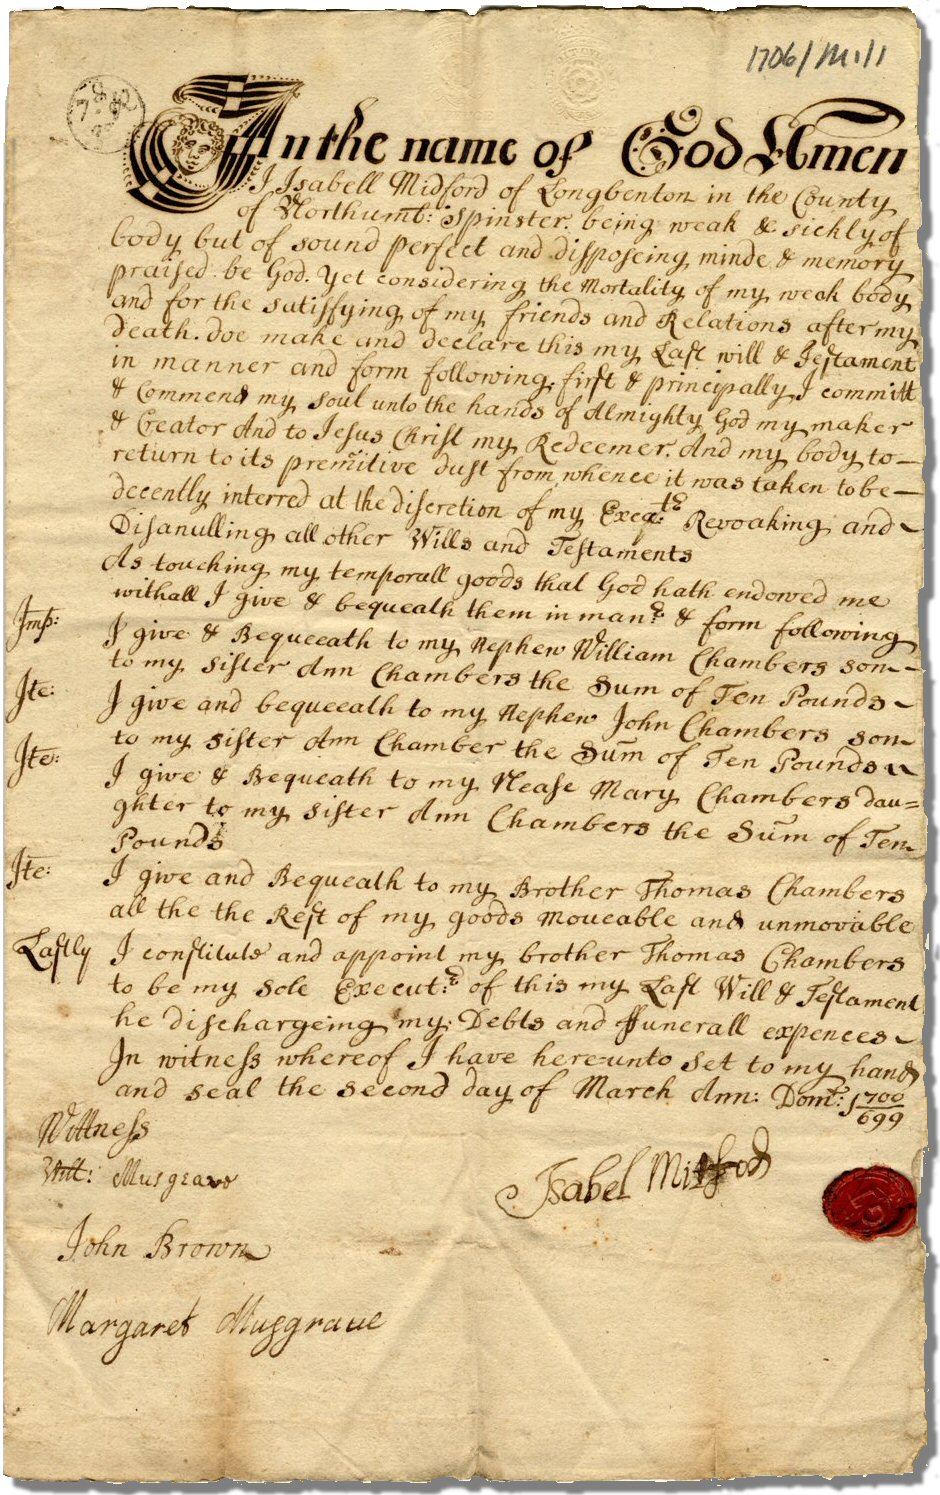 Full image of the will of Isabel Mitford of Longbenton. Ref: DPRI/1/1706/M1/1